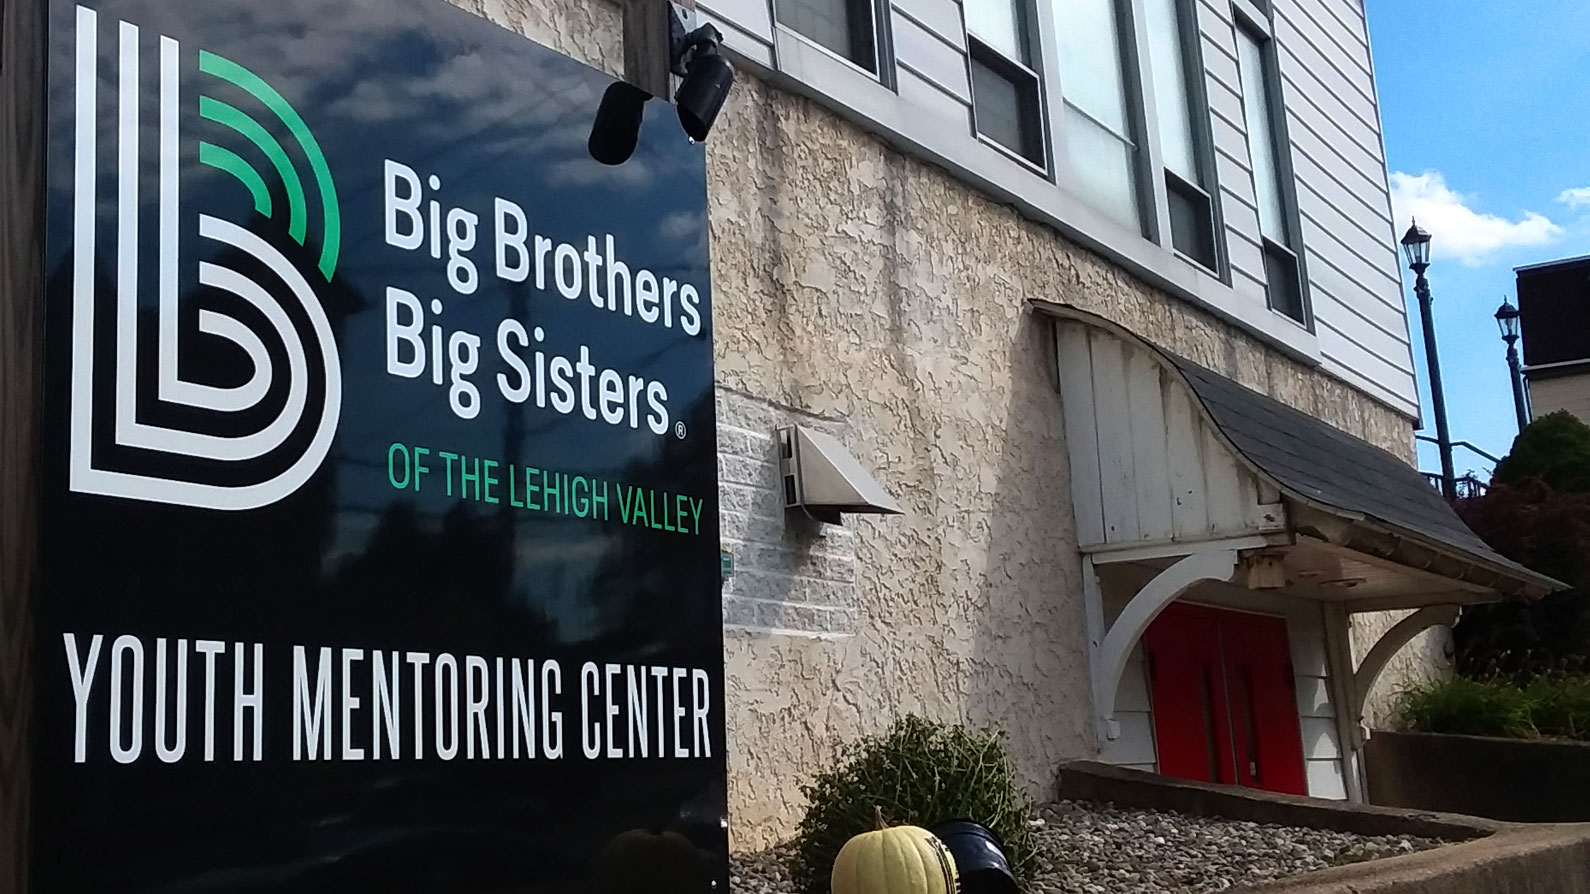 Big Brothers Big Sisters Mission and Vision Statements Analysis